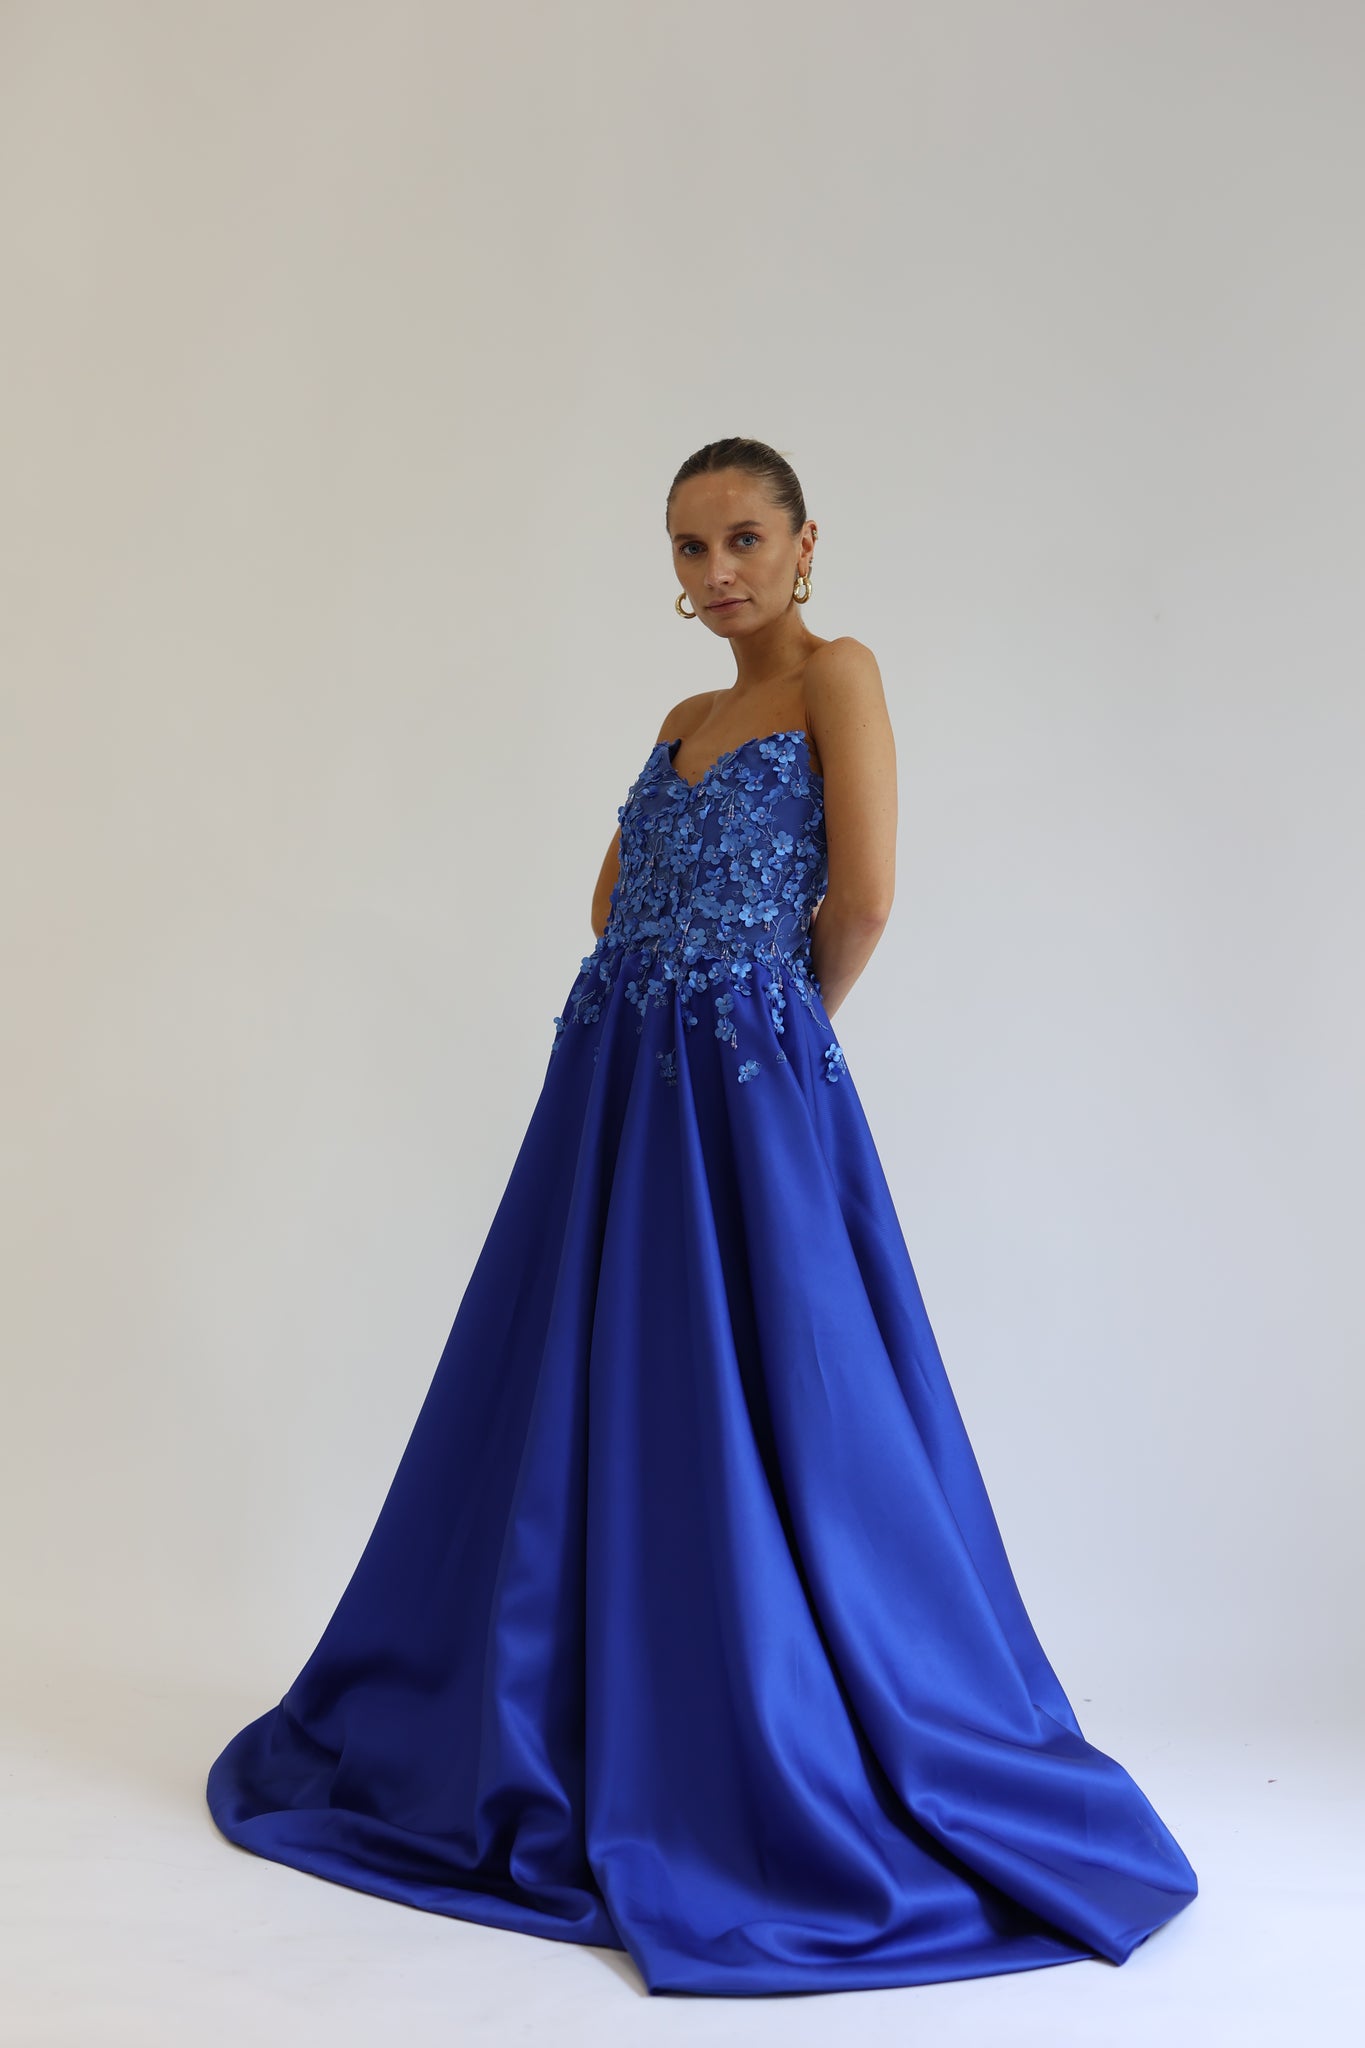 Royal Blue Ballgown with Floral detail